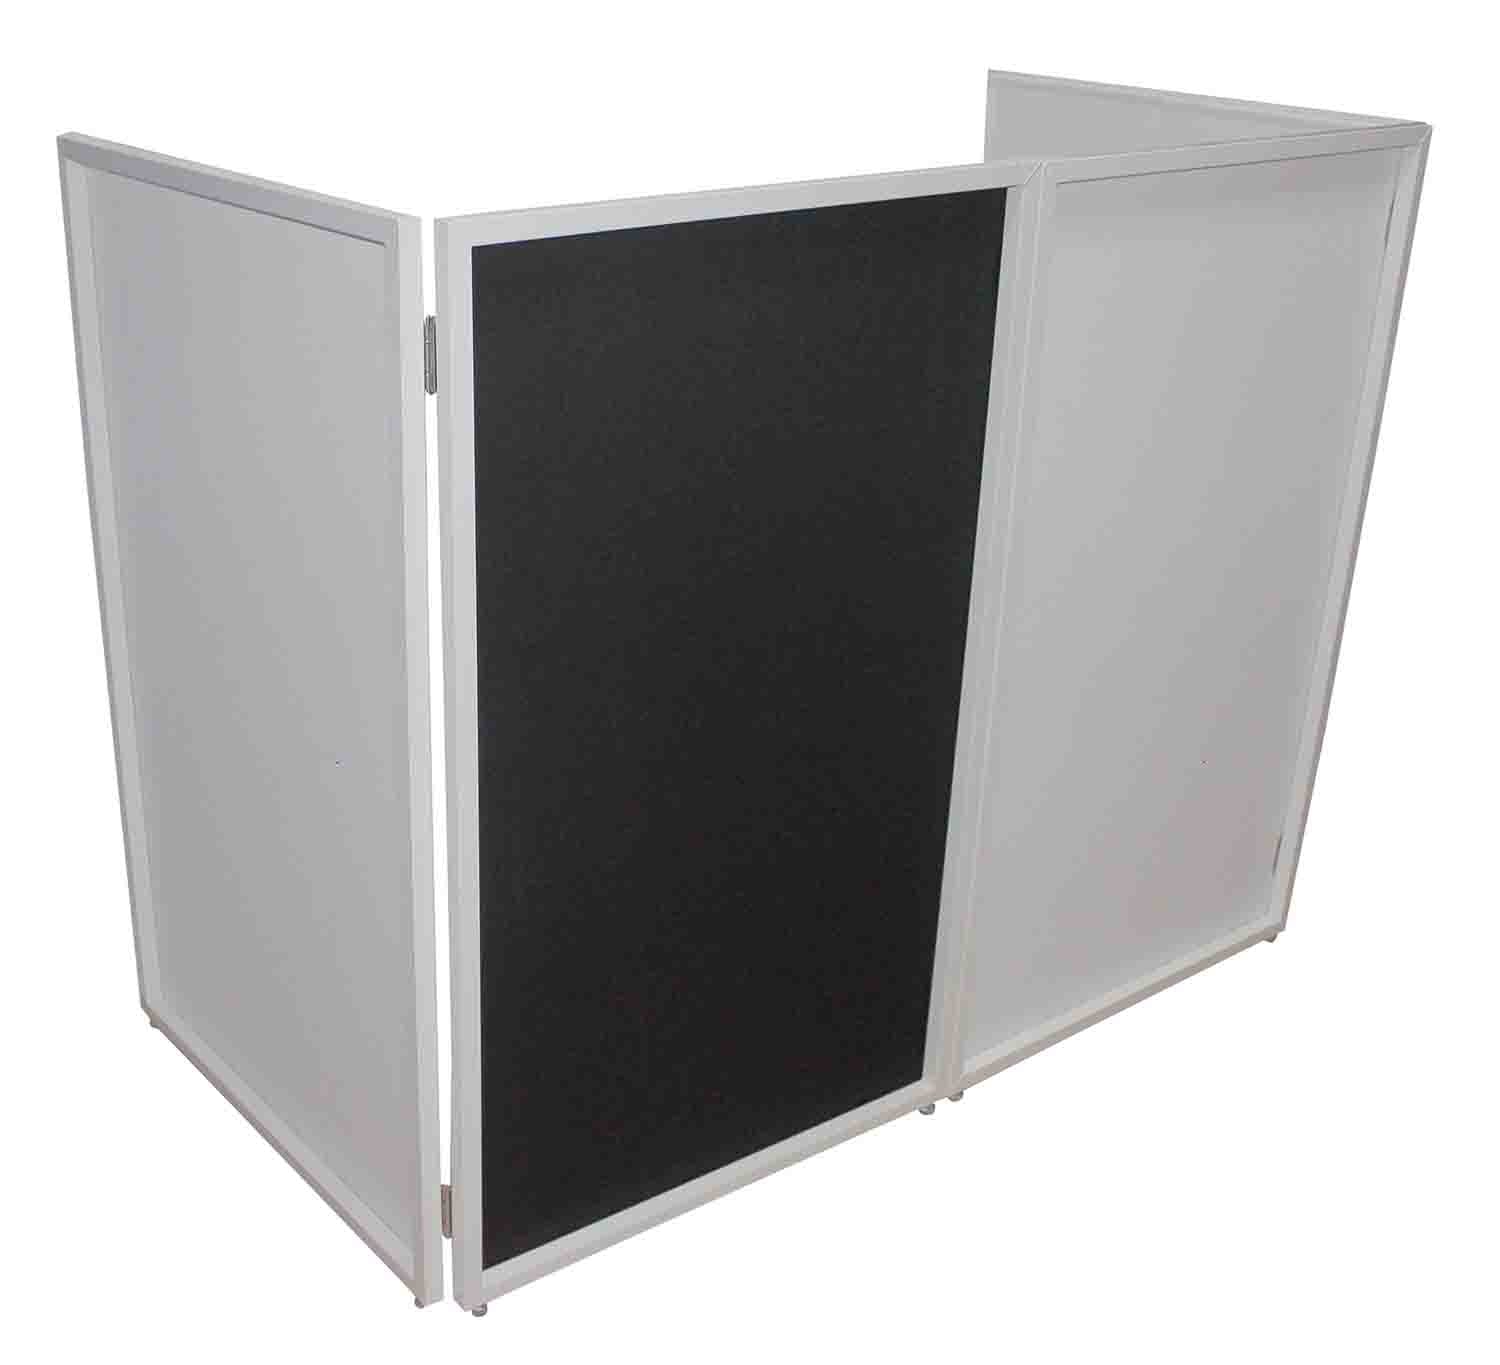 ProX XF-4X3048W MK2 Four Panel Collapse and Go DJ Facade With White Frame and Carry Bag - Black and White Scrims - Hollywood DJ